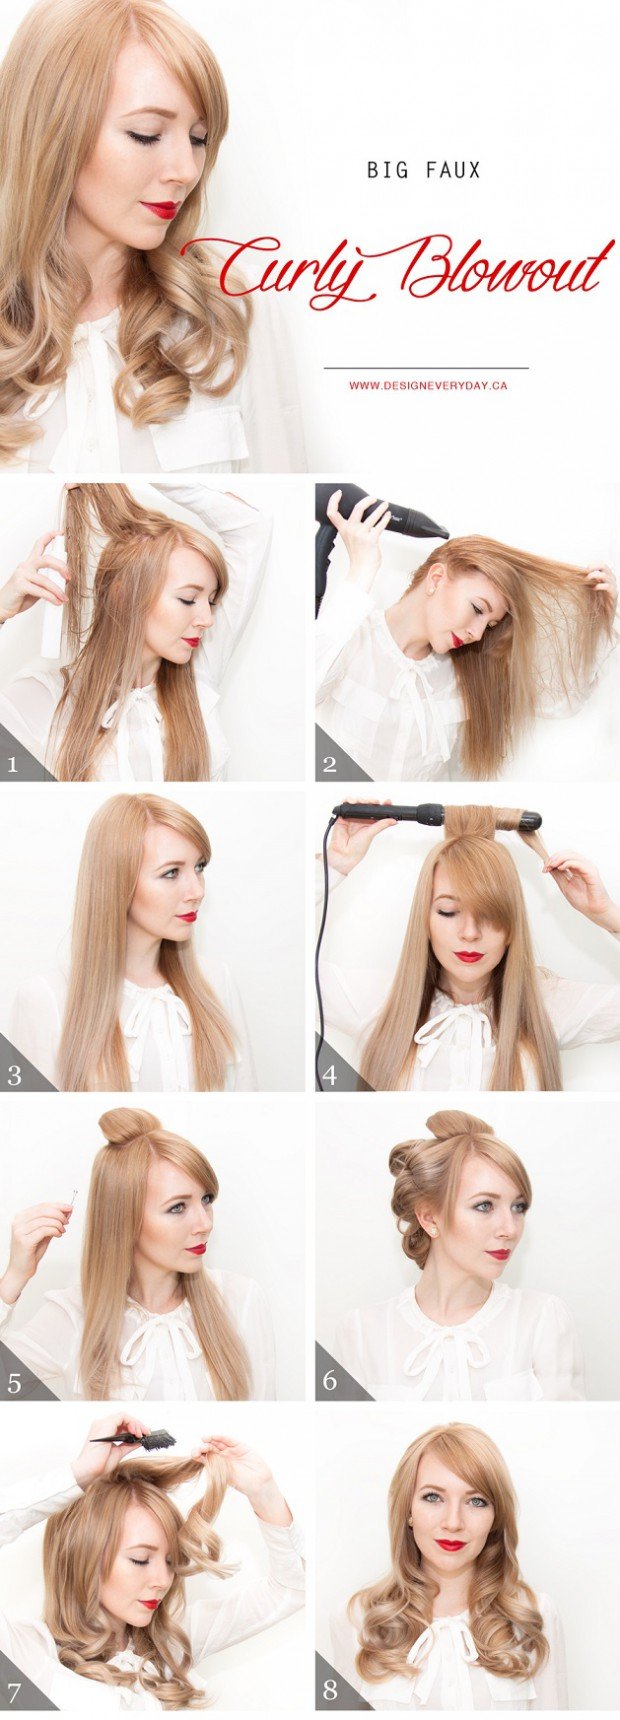 hairstyles (10)